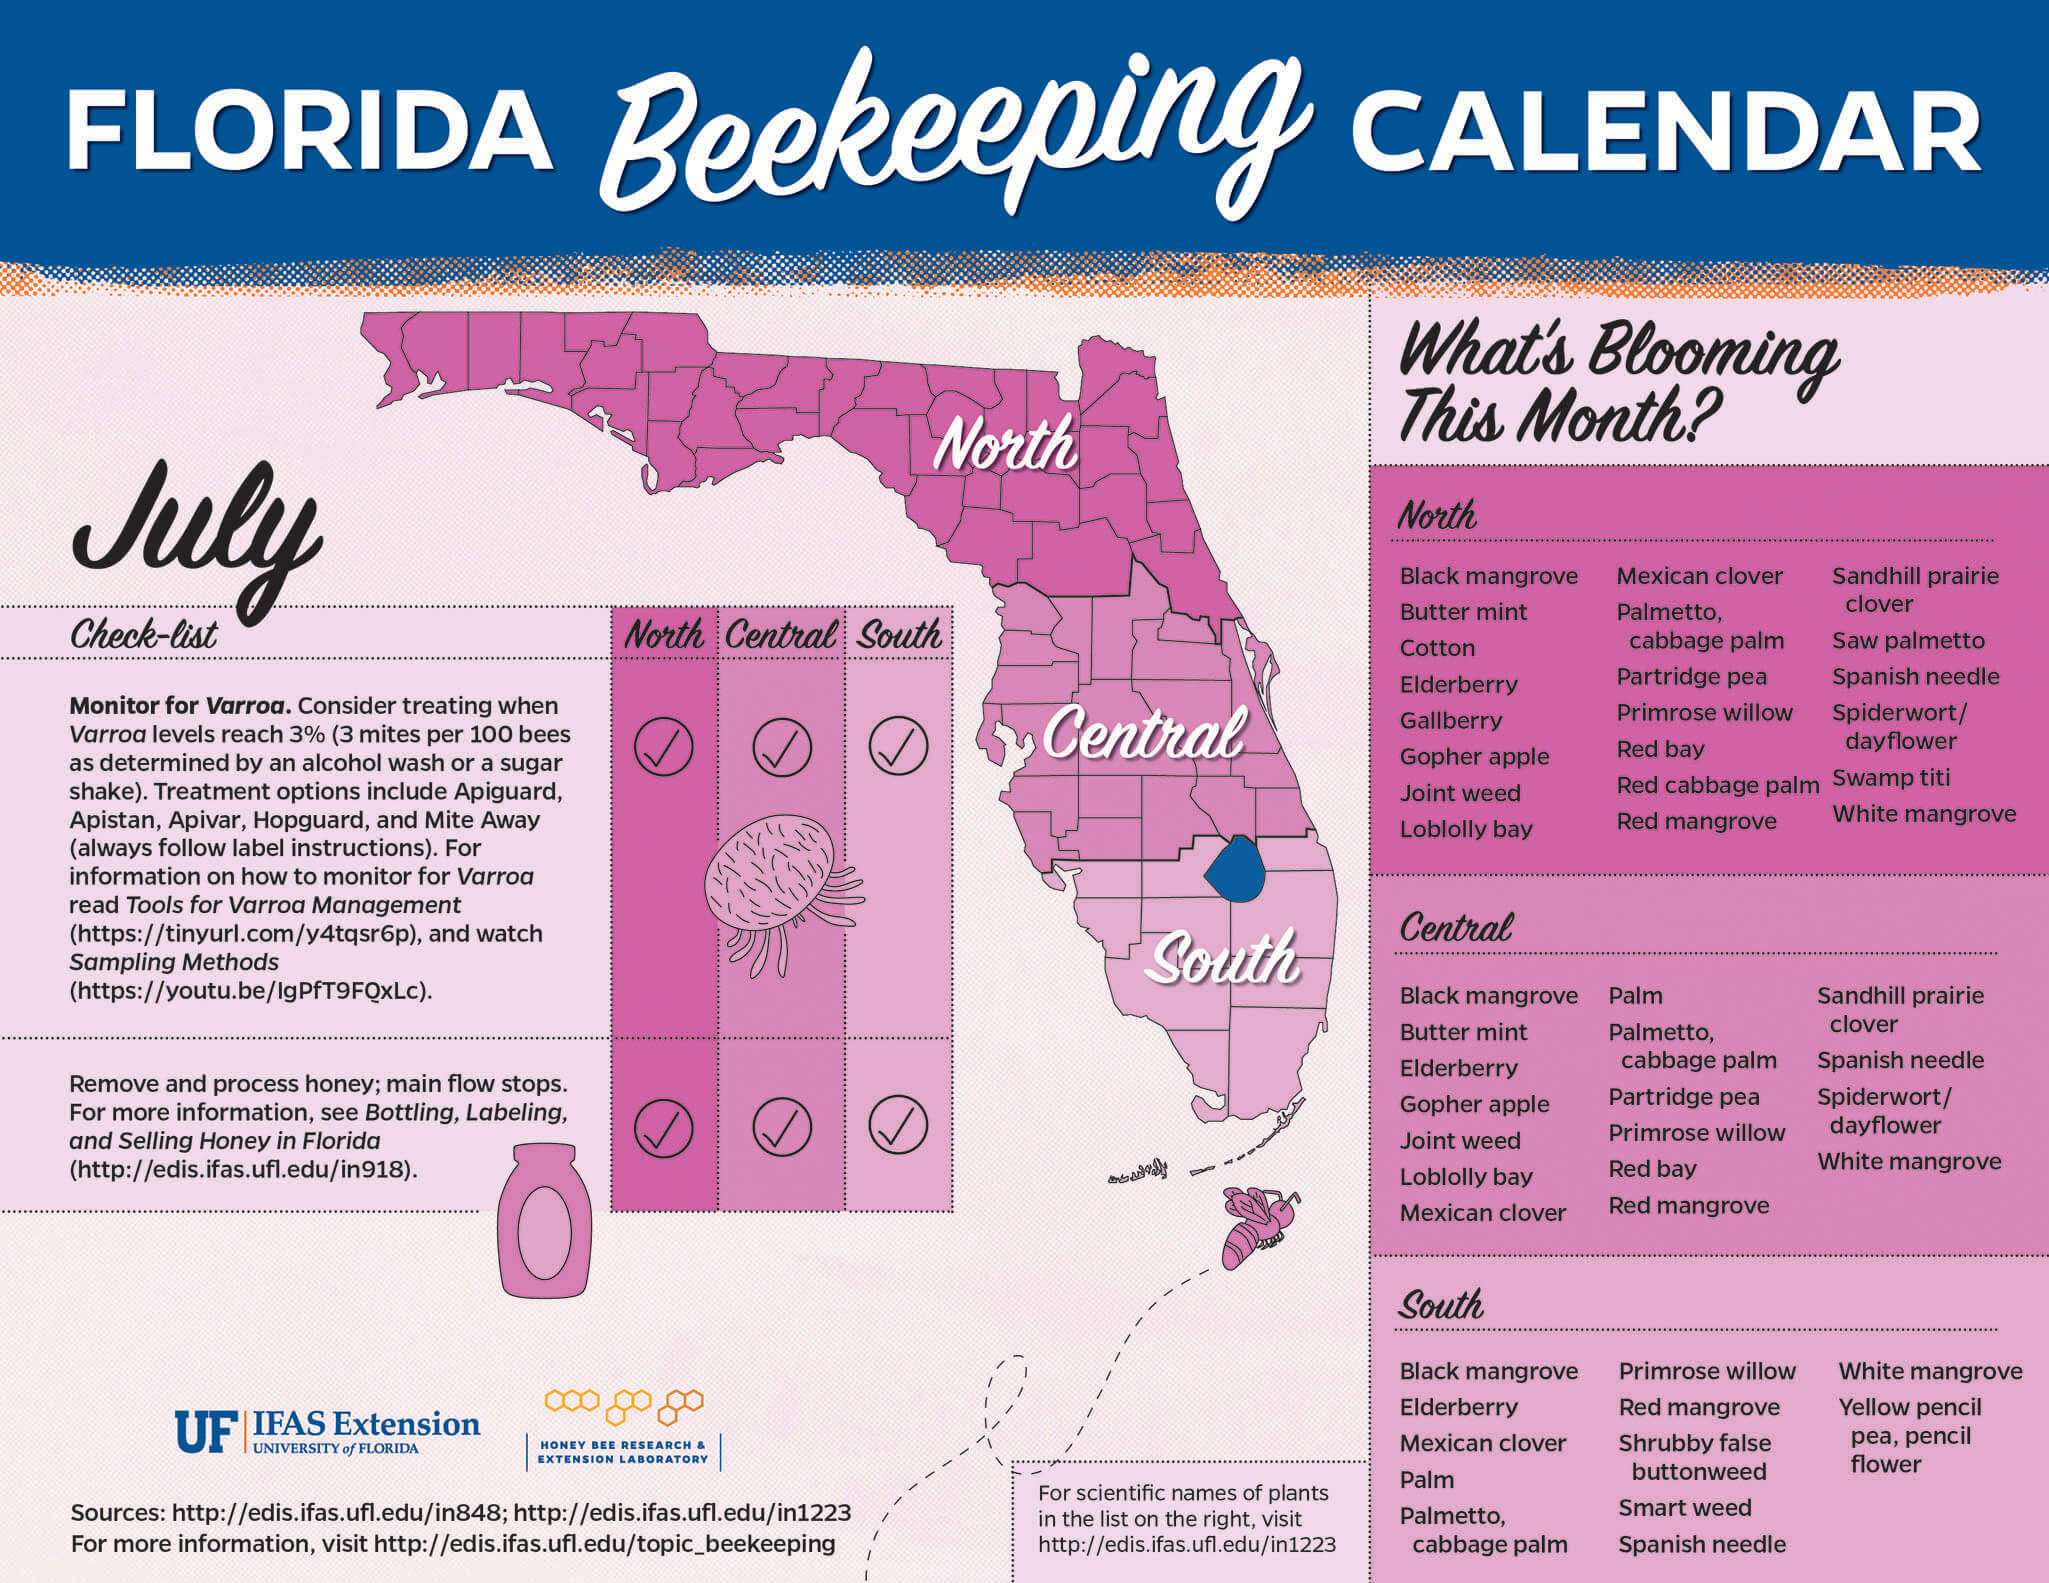 Florida beekeeping calendar for the month of July